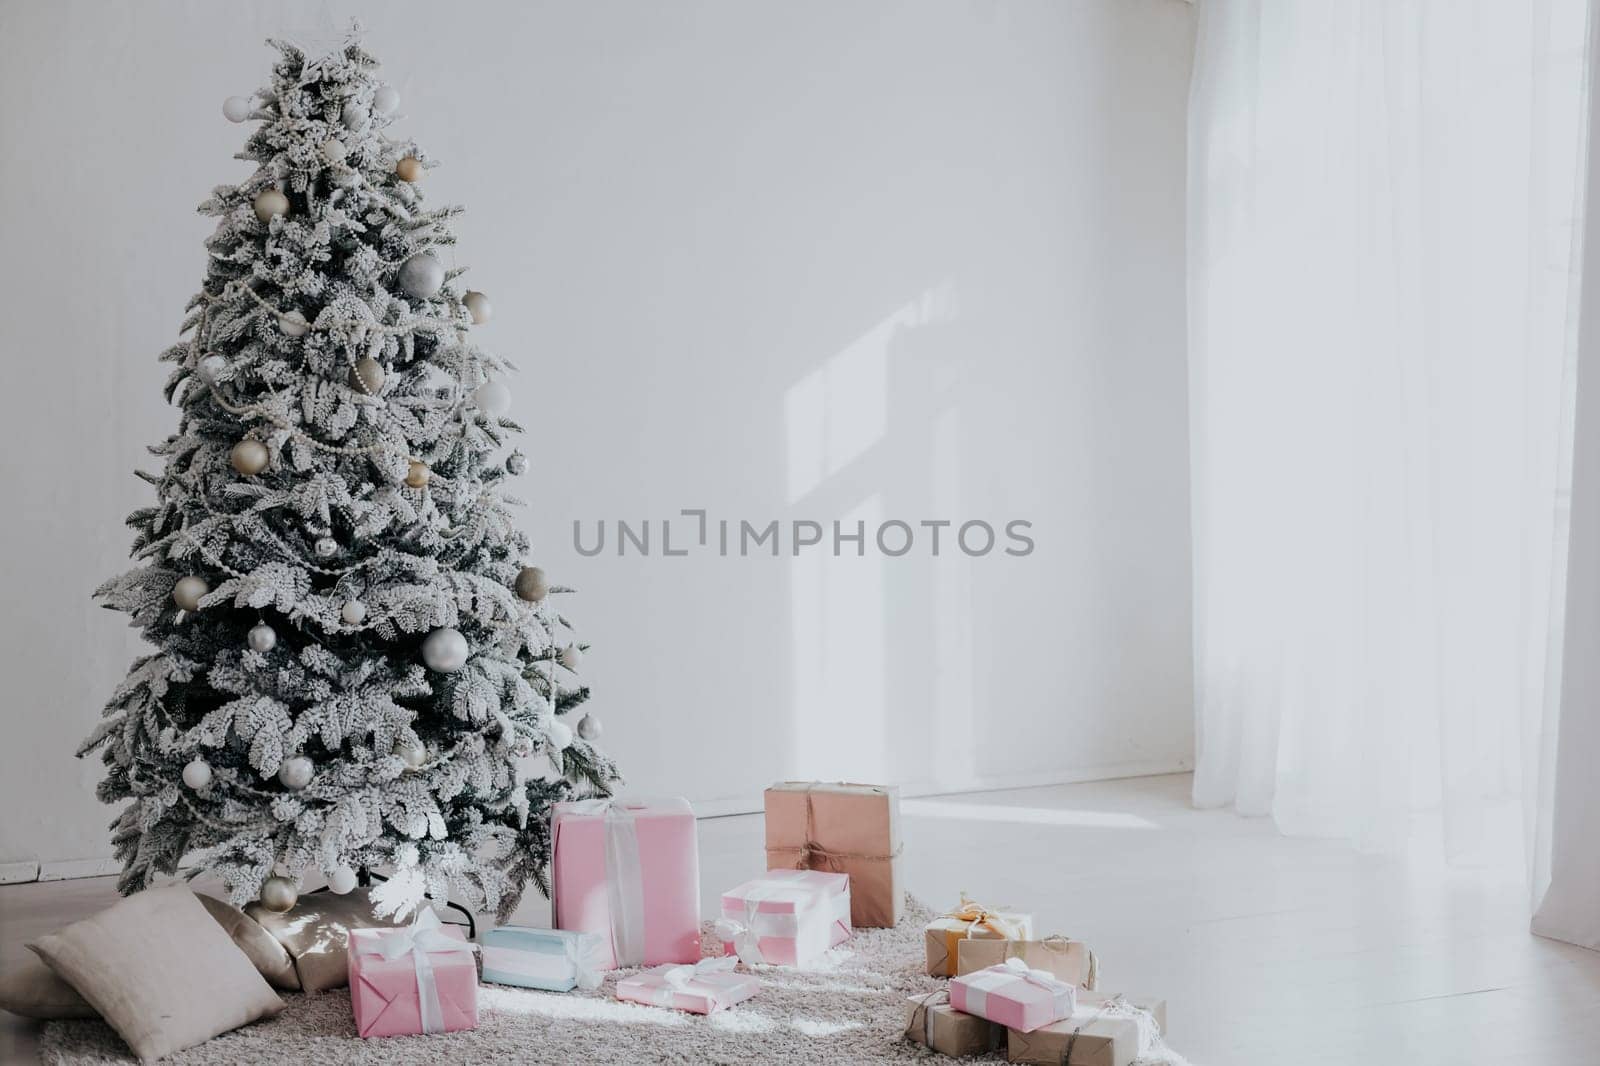 White Christmas tree decorating new year gifts Interior holiday winter by Simakov